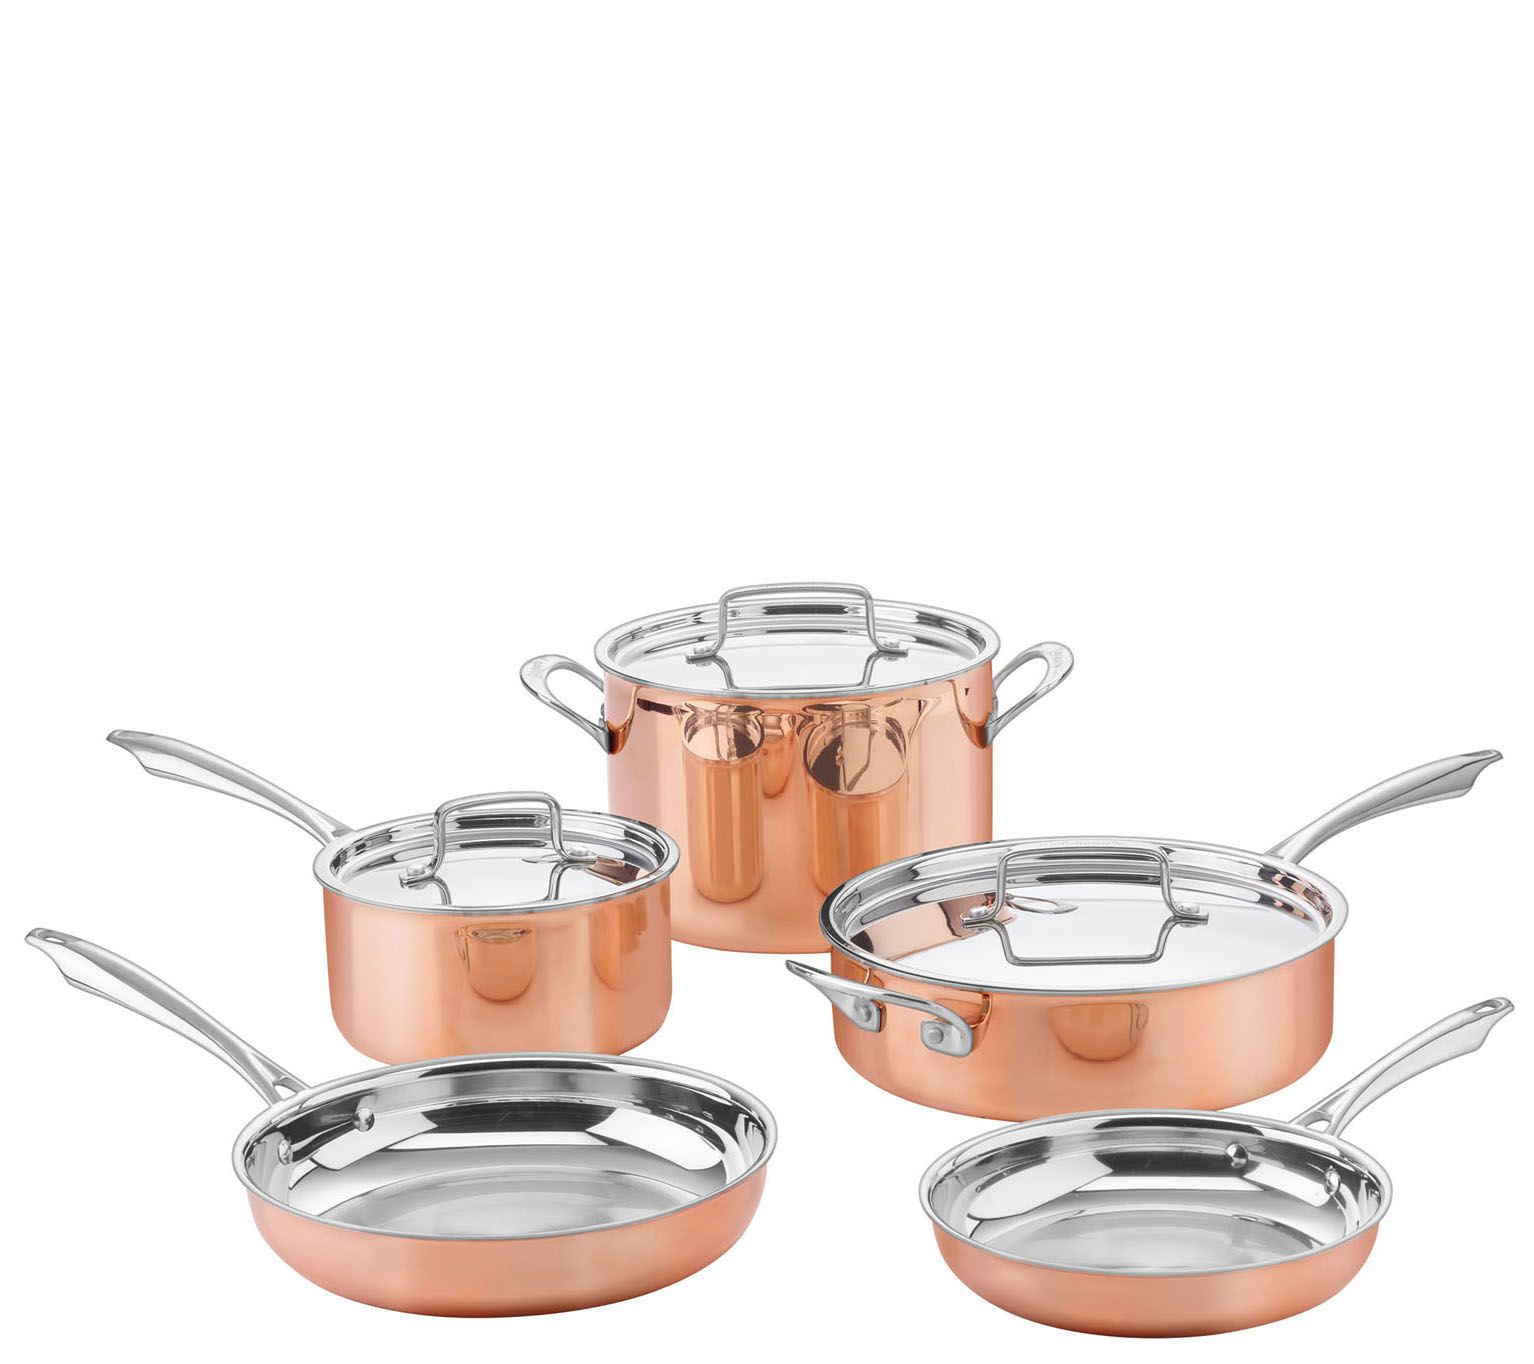 Tri-Ply Stainless Steel Sauce Pan with Cover 1 1/2 QT 6 - Rose Kitchen